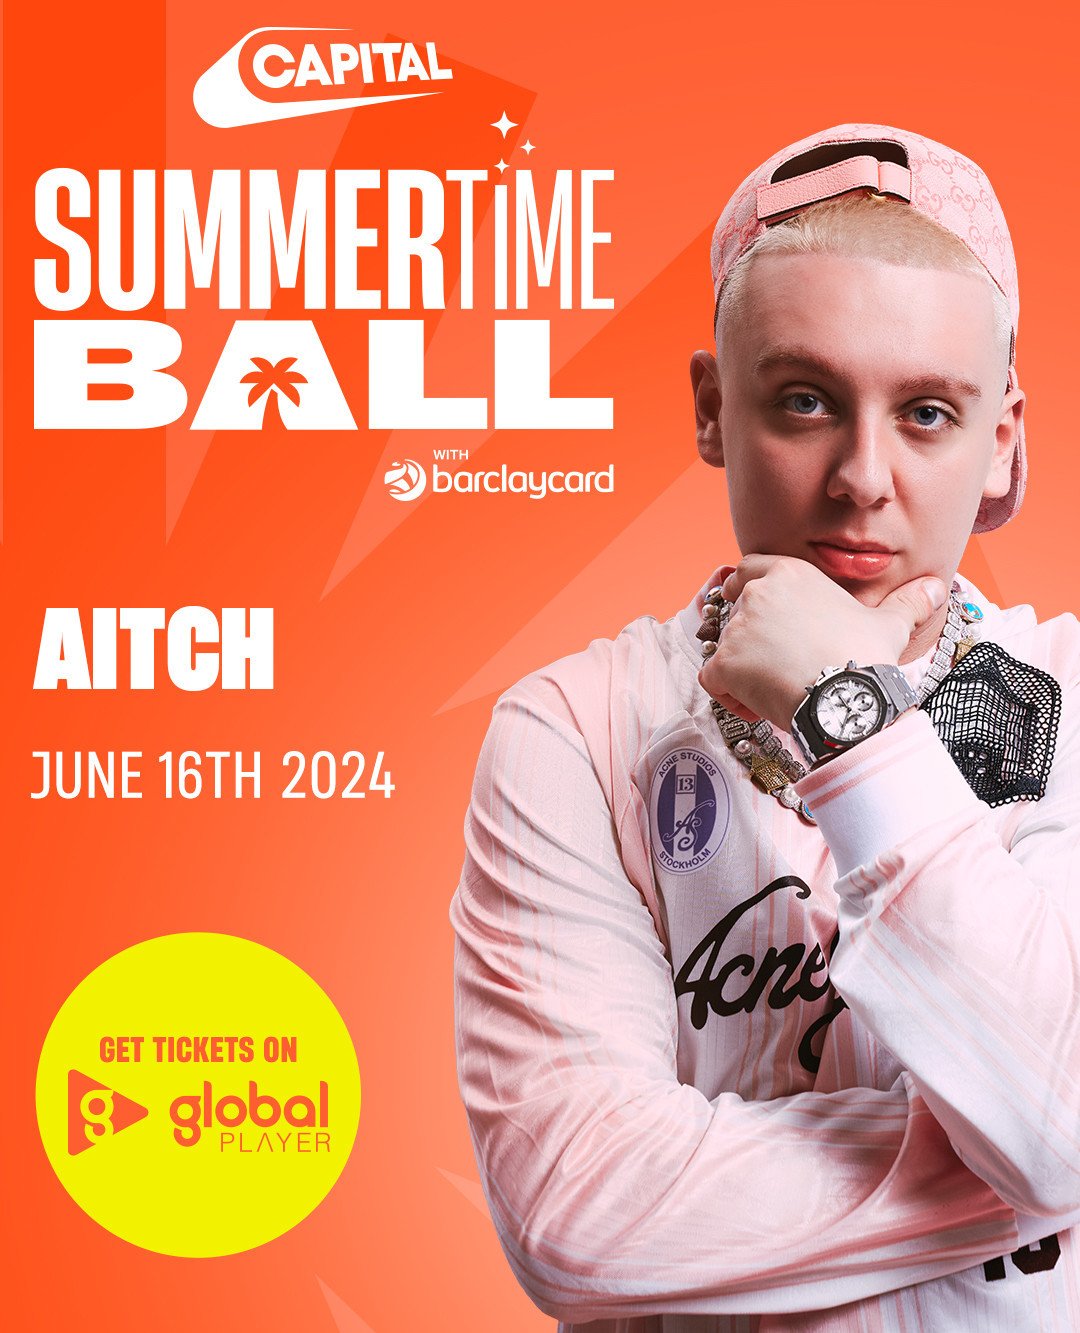 IT'S OFFICIAL 🔥 So gassed to announce that @aitch will be performing at this year's @capitalofficial Summertime Ball 🙌 
 
#CapitalSTB #aitch